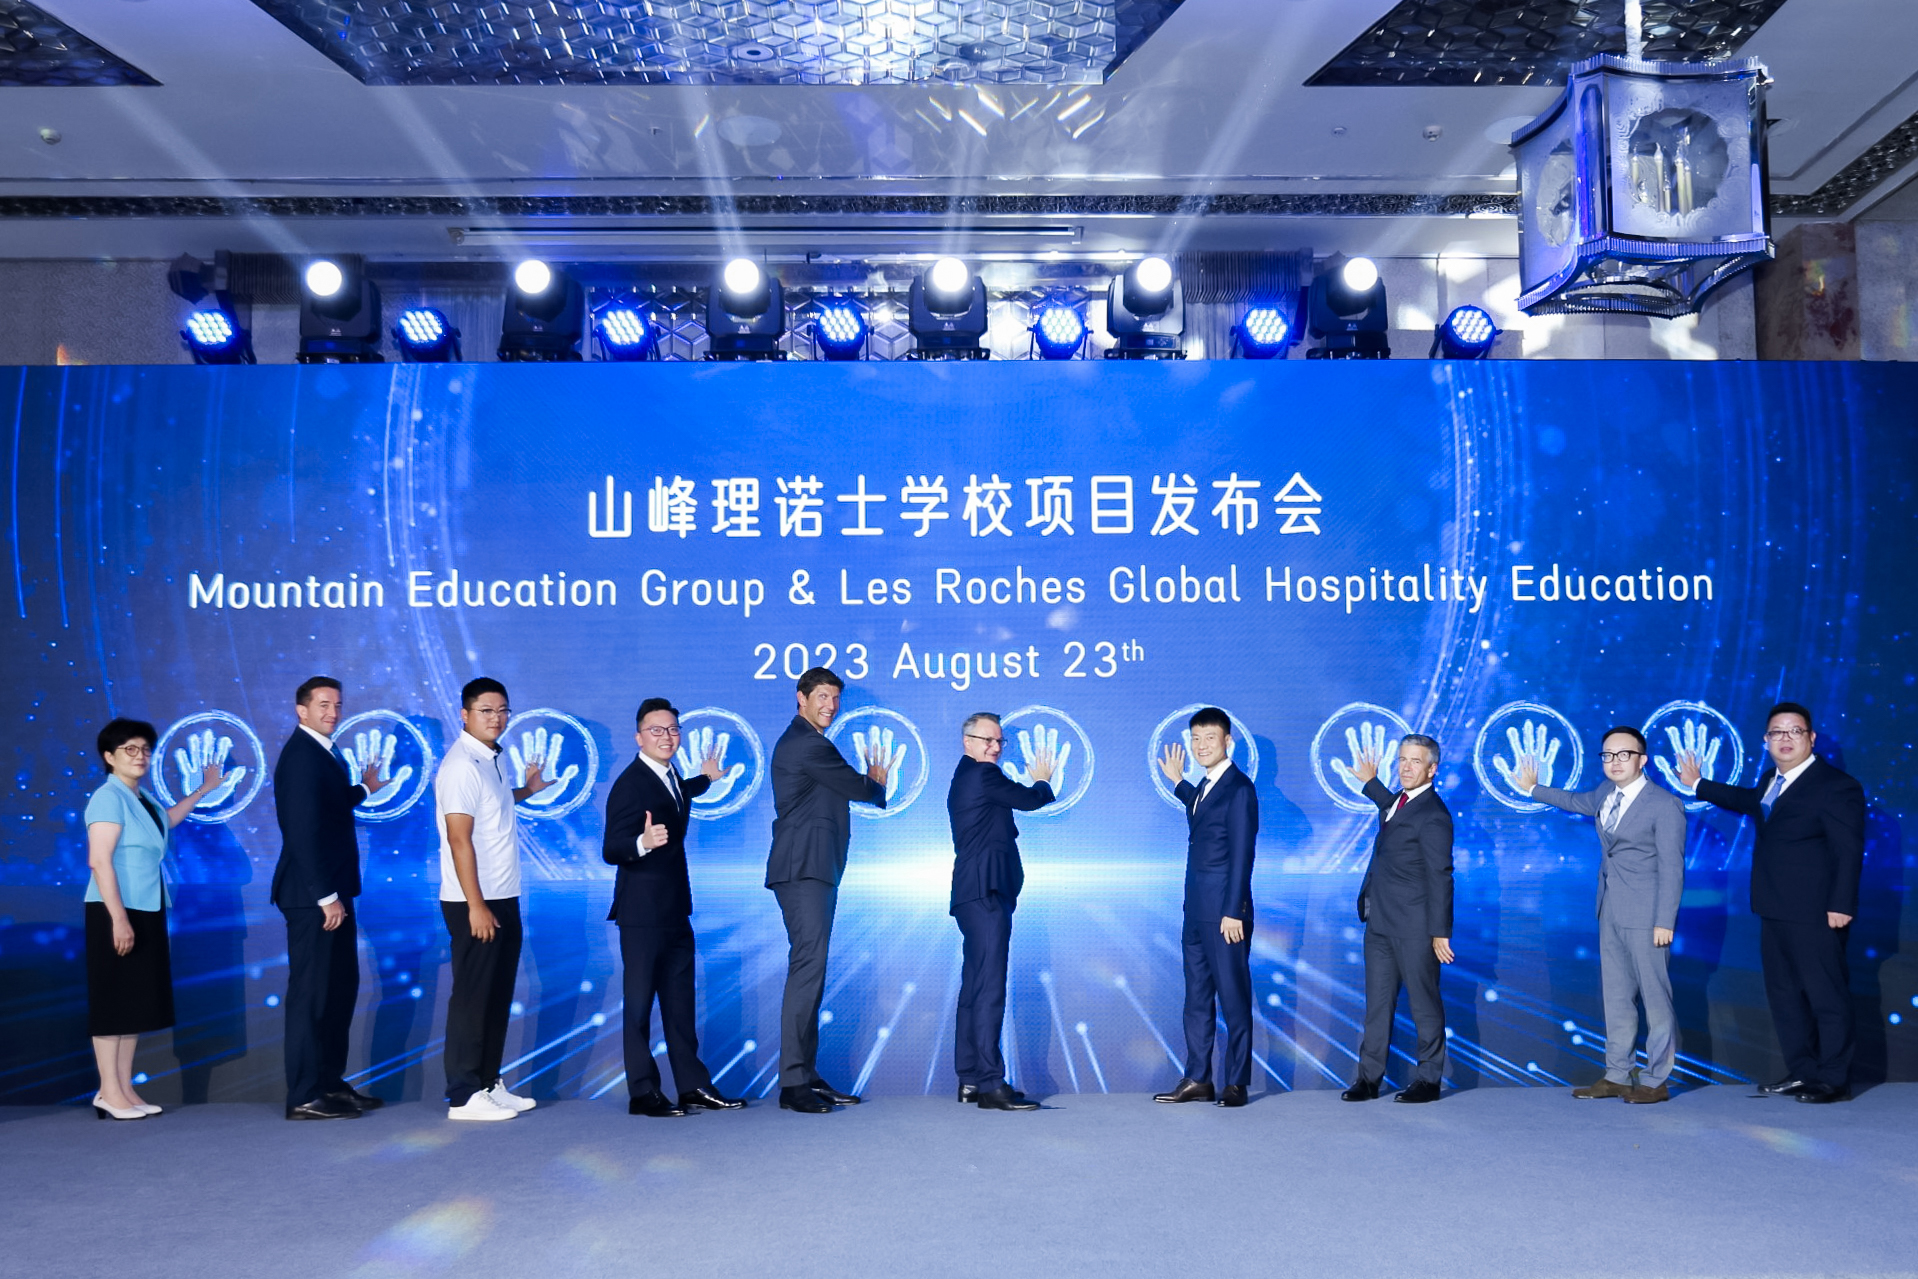 Mountain Education Group & Les Roches Global Hospitality Education  to open state-of-the art higher education campuses in China